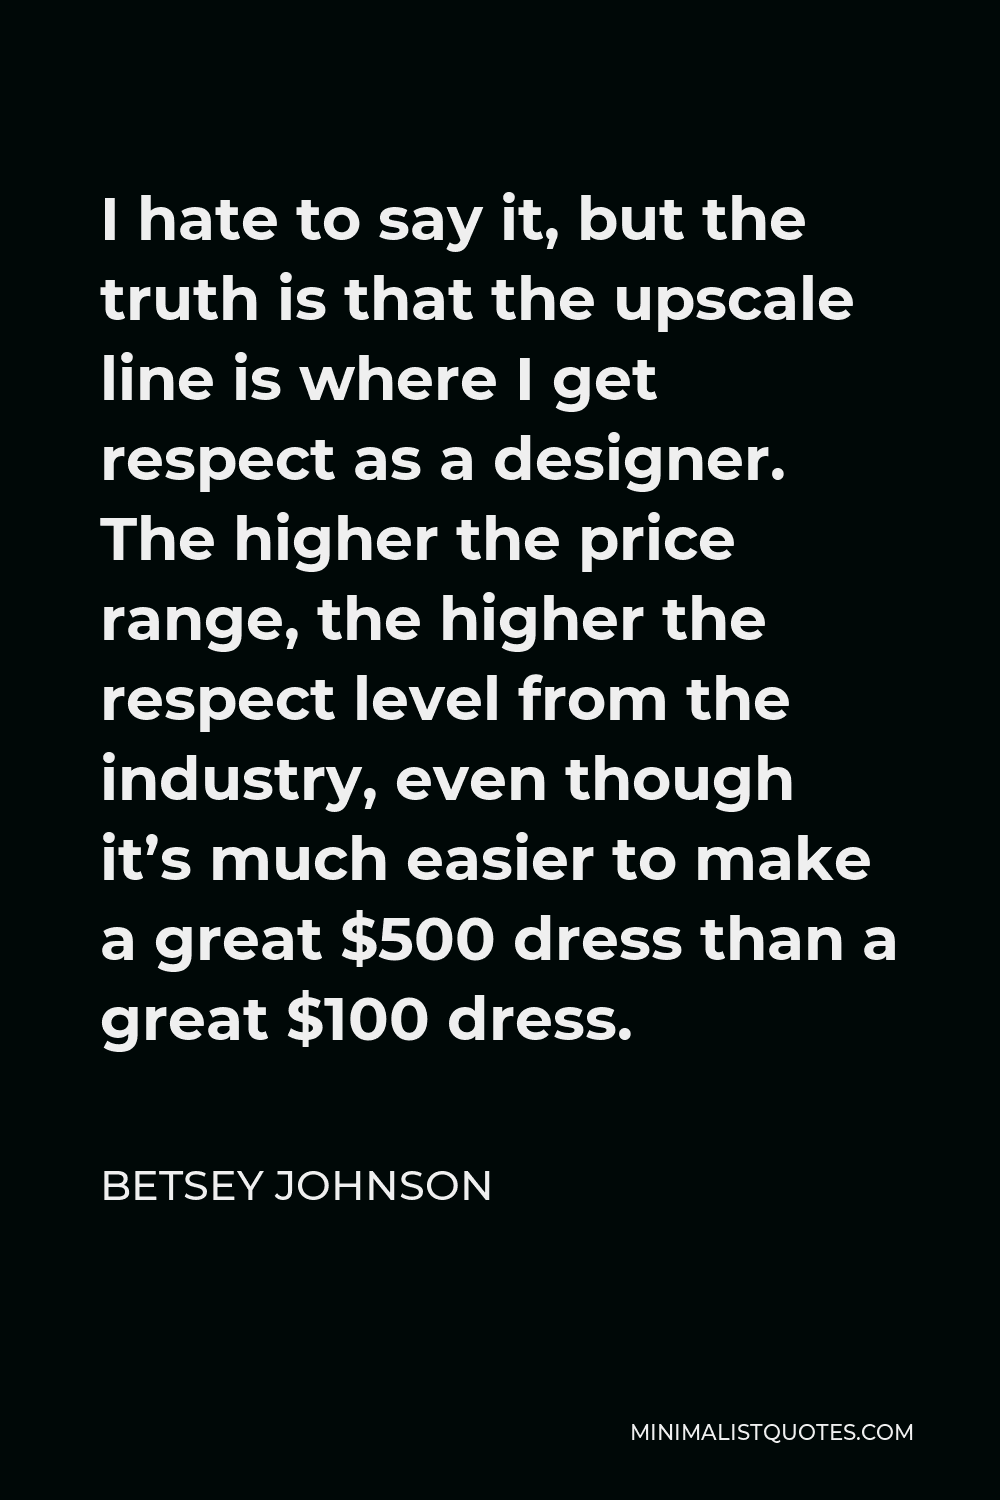 Betsey Johnson Quote - I hate to say it, but the truth is that the upscale line is where I get respect as a designer. The higher the price range, the higher the respect level from the industry, even though it’s much easier to make a great $500 dress than a great $100 dress.